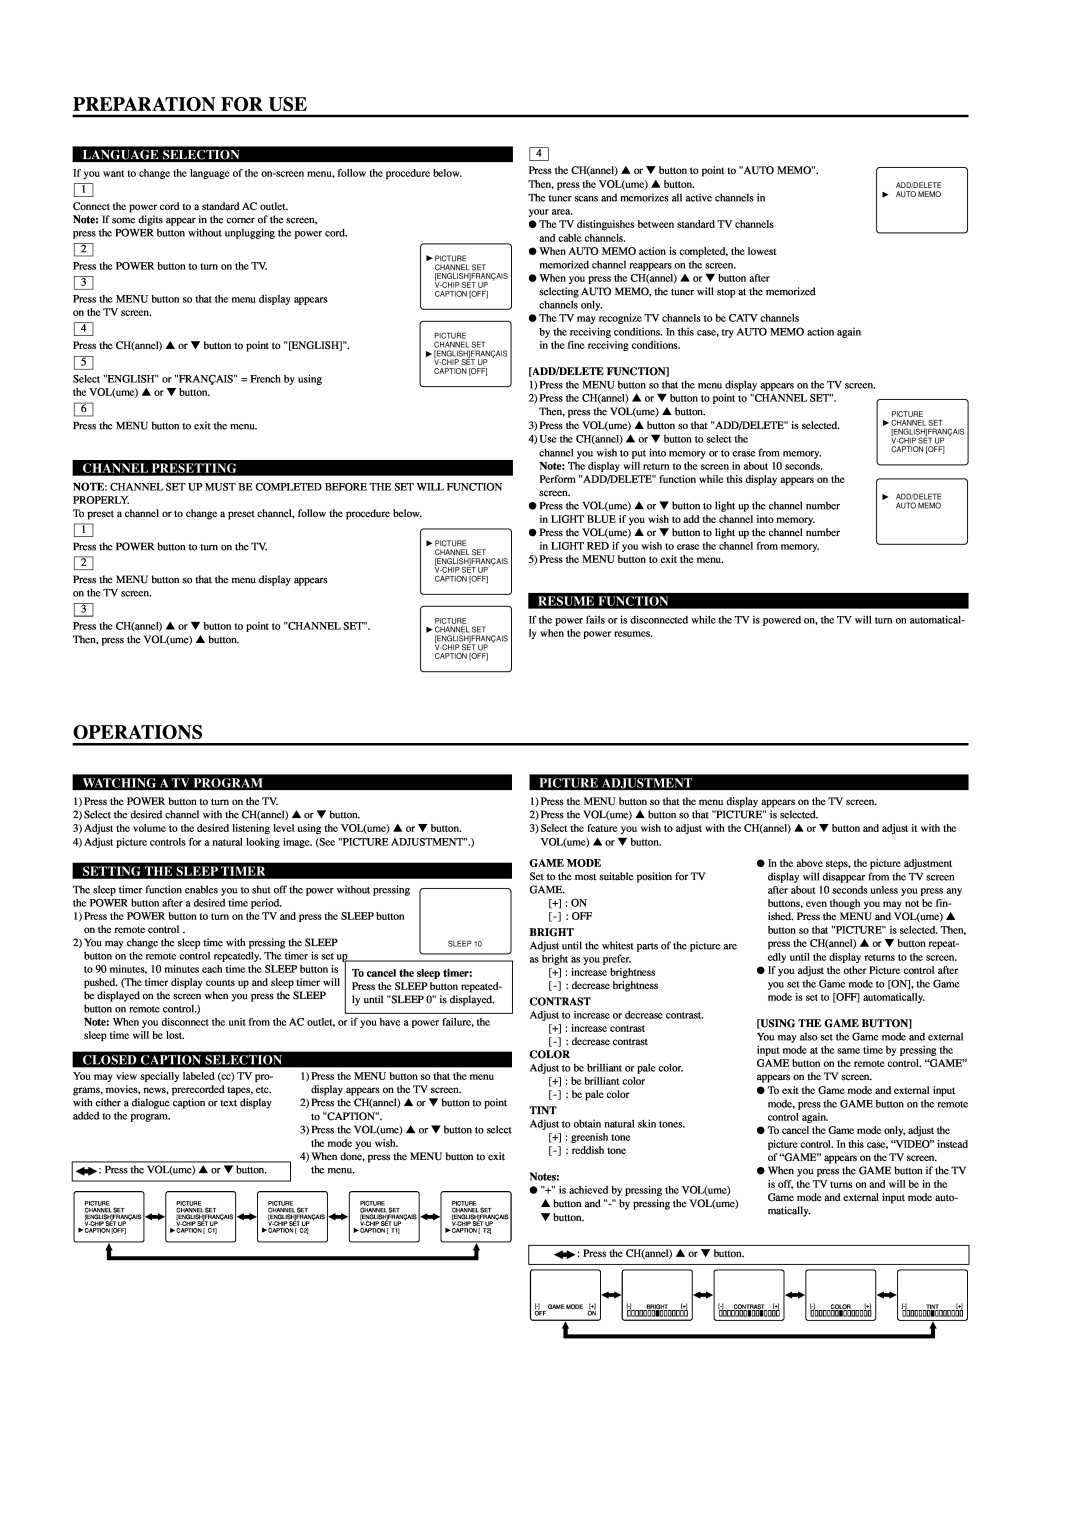 Sylvania DCT1903R Preparation For Use, Operations, Language Selection, Channel Presetting, Resume Function, Game Mode 